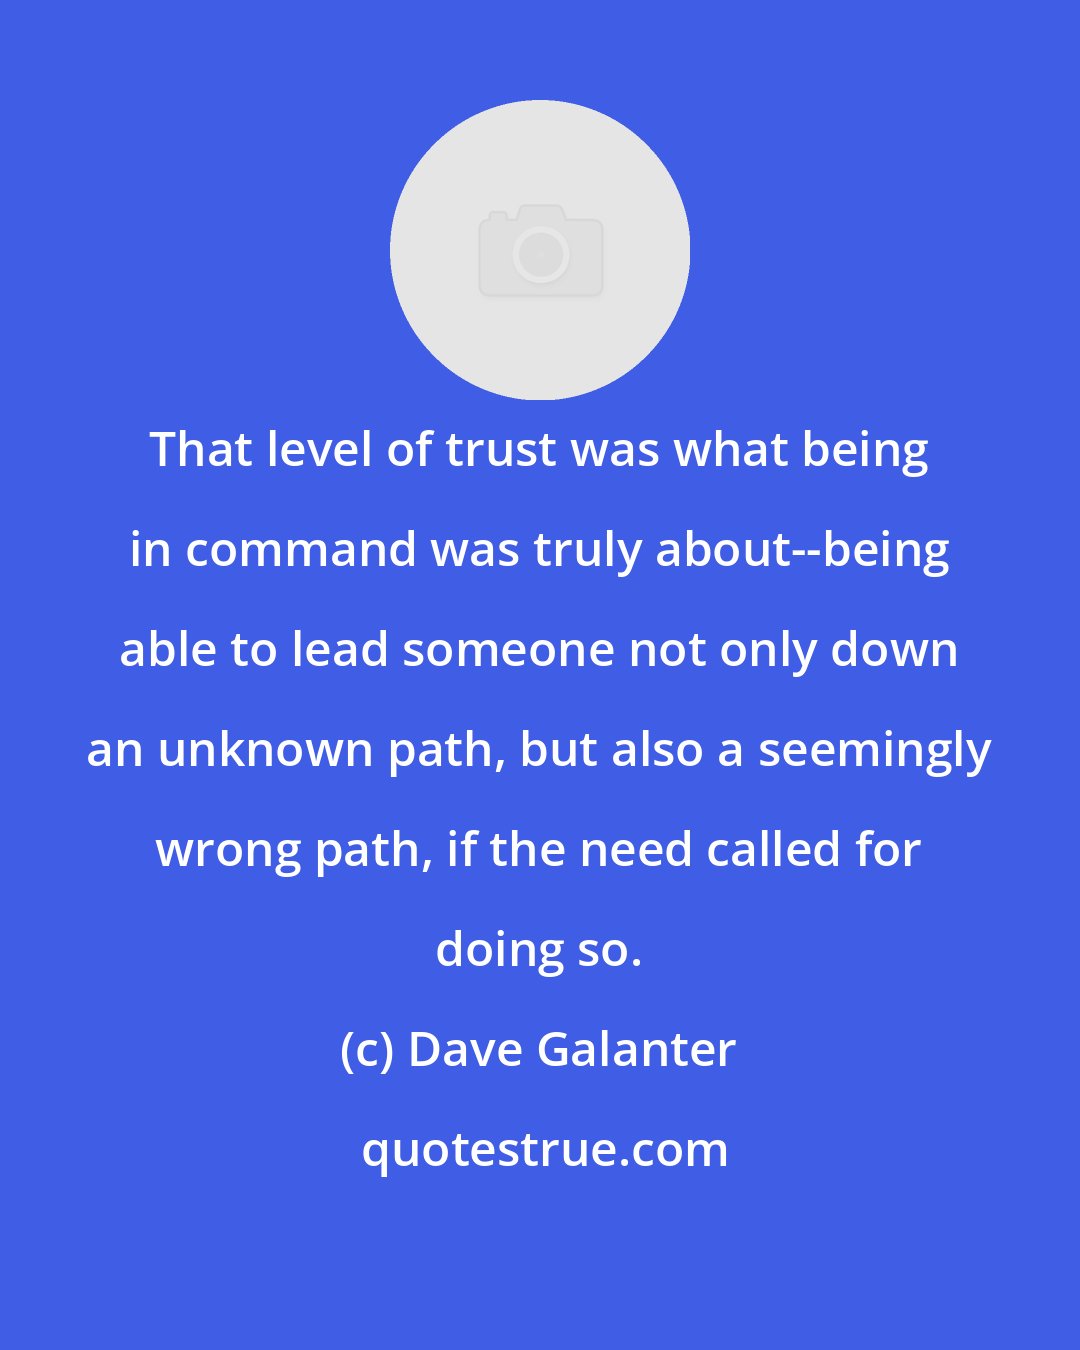 Dave Galanter: That level of trust was what being in command was truly about--being able to lead someone not only down an unknown path, but also a seemingly wrong path, if the need called for doing so.